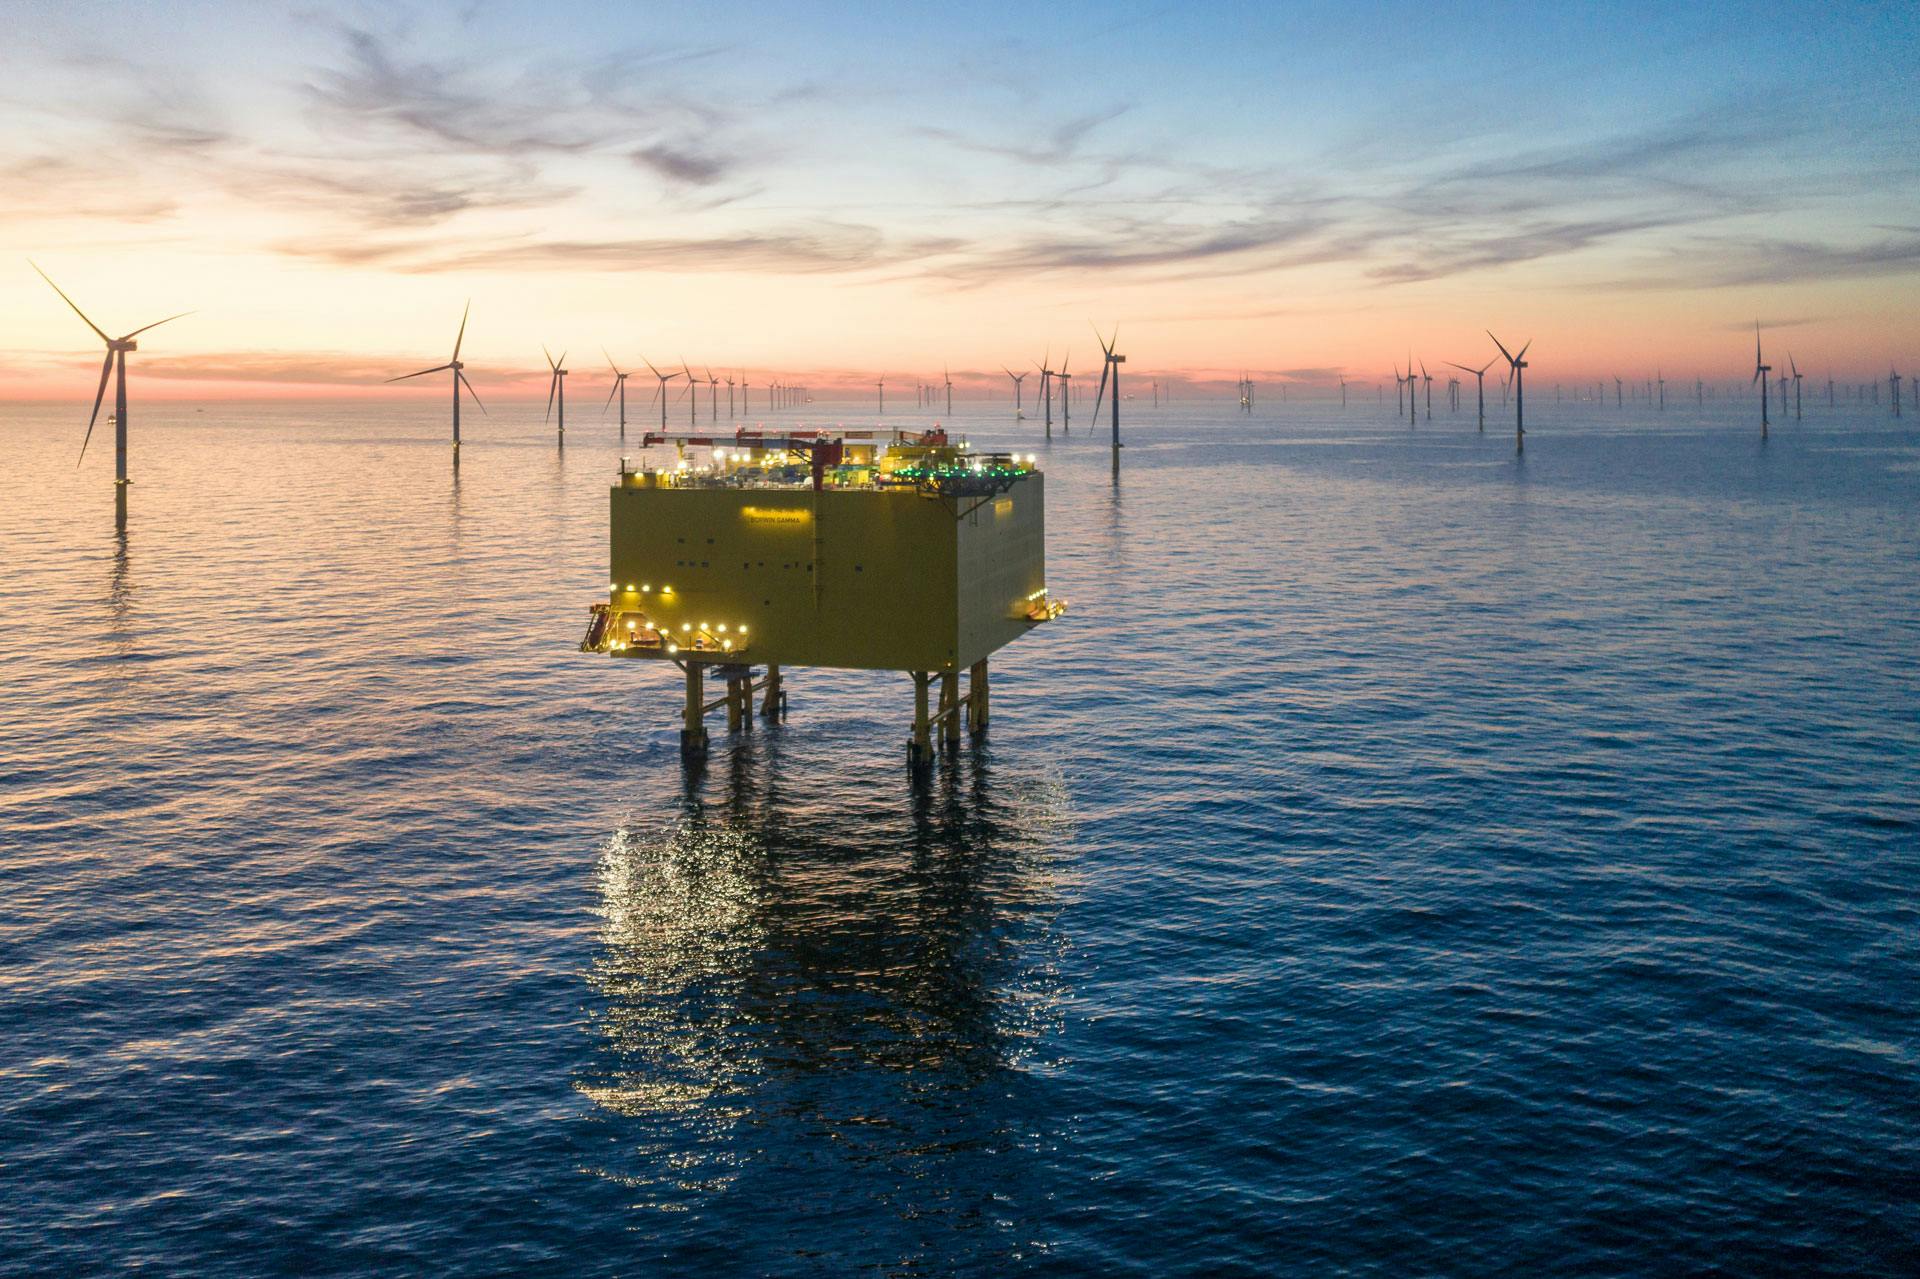 Offshore facility with turbines and horizon in the background, at dusk